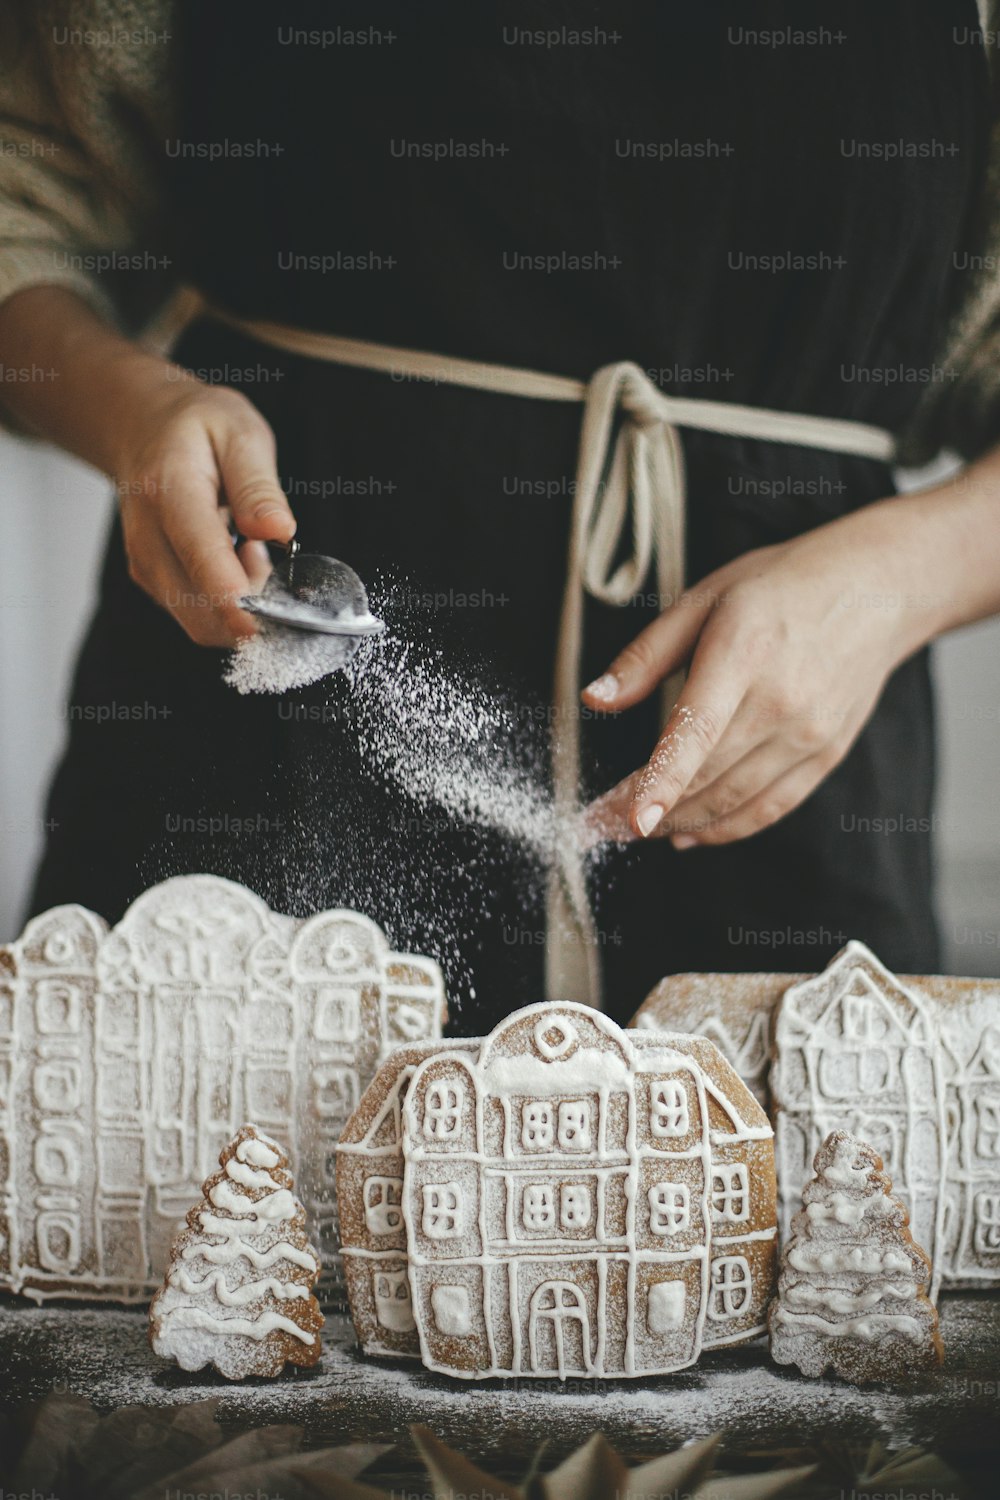 Woman in apron sprinkling sugar powder on christmas gingerbread houses on wooden table in rustic scandinavian kitchen. Atmospheric moody image. Christmas holiday preparation and traditions